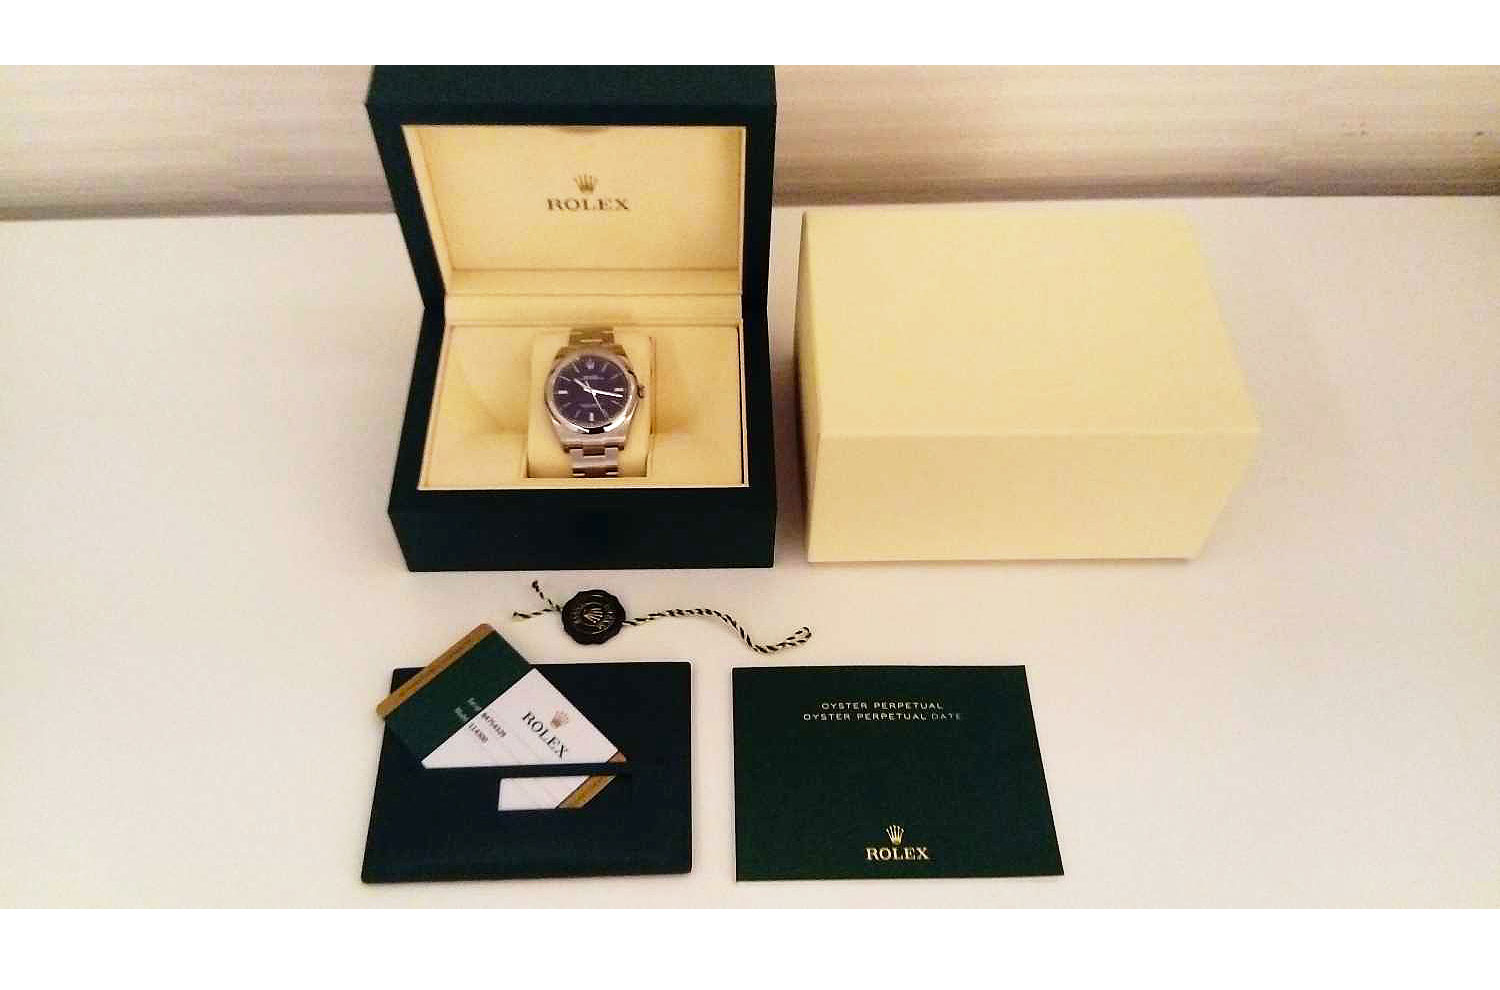 montre-rolex-oyster-perpetual-bleue-documents.jpg